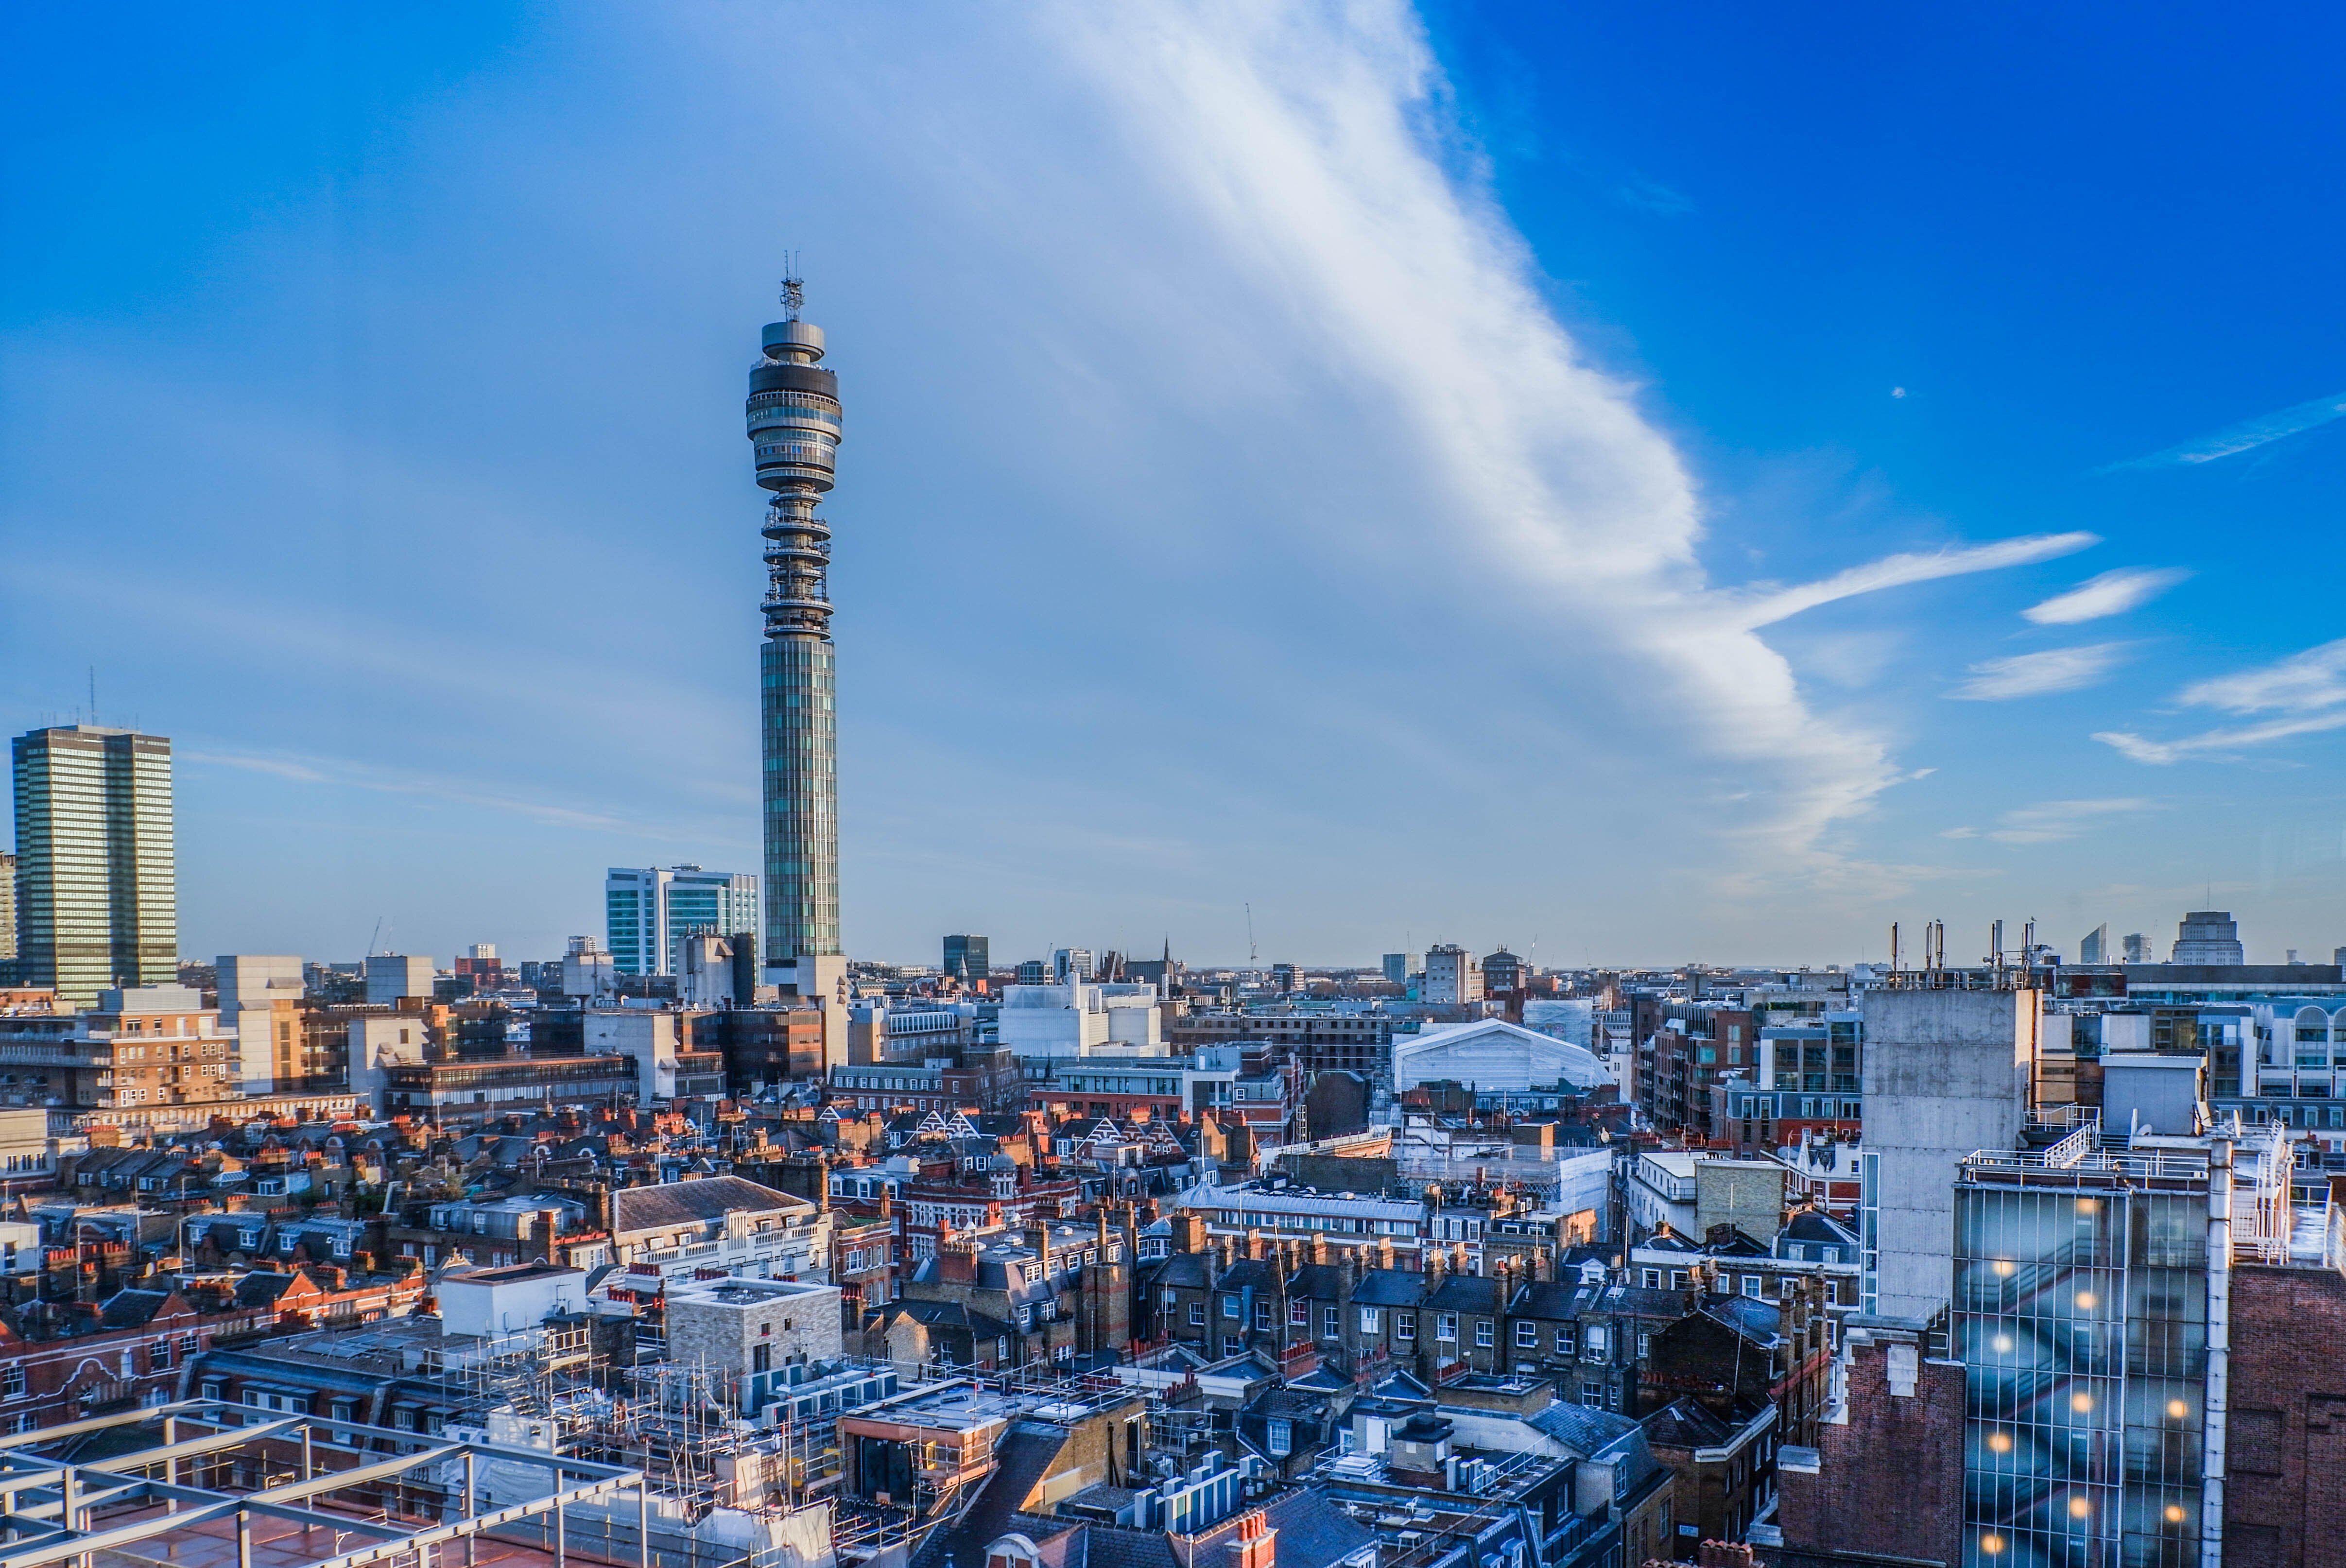 BT Tower sold to North American hotel company for £275m